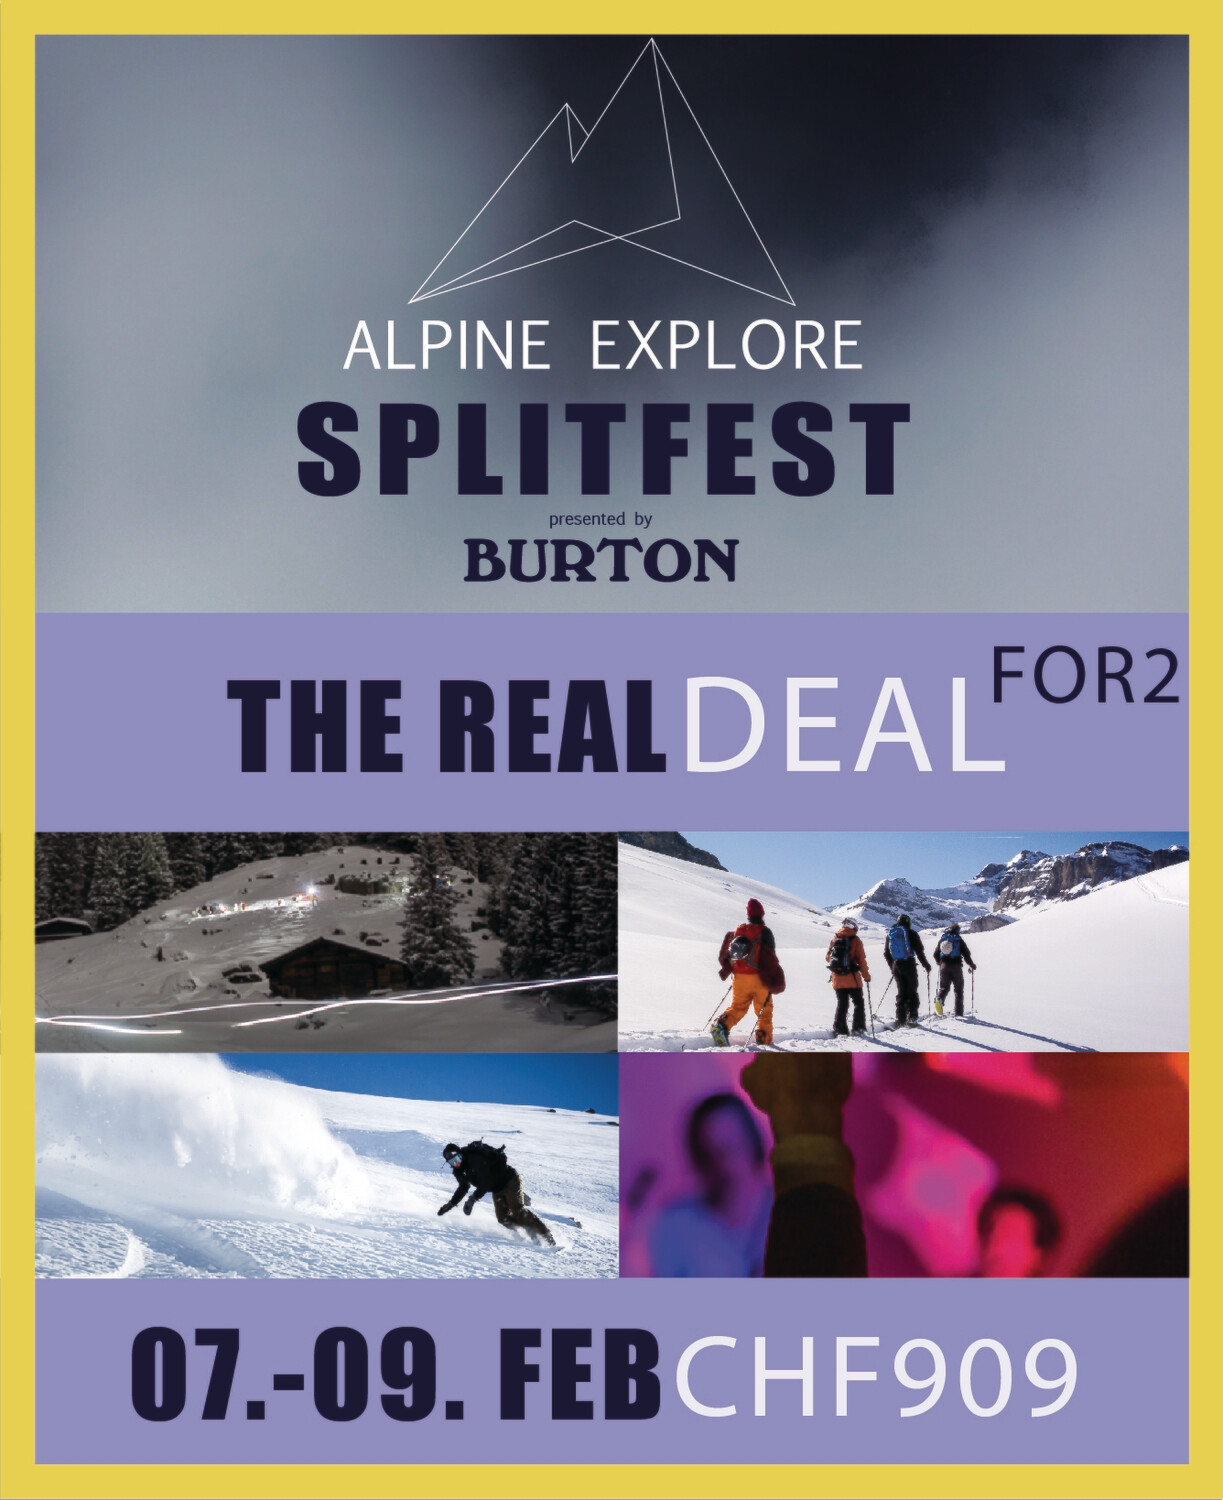 The Real Deal FOR2 - Alpine Explore Splitfest 2020